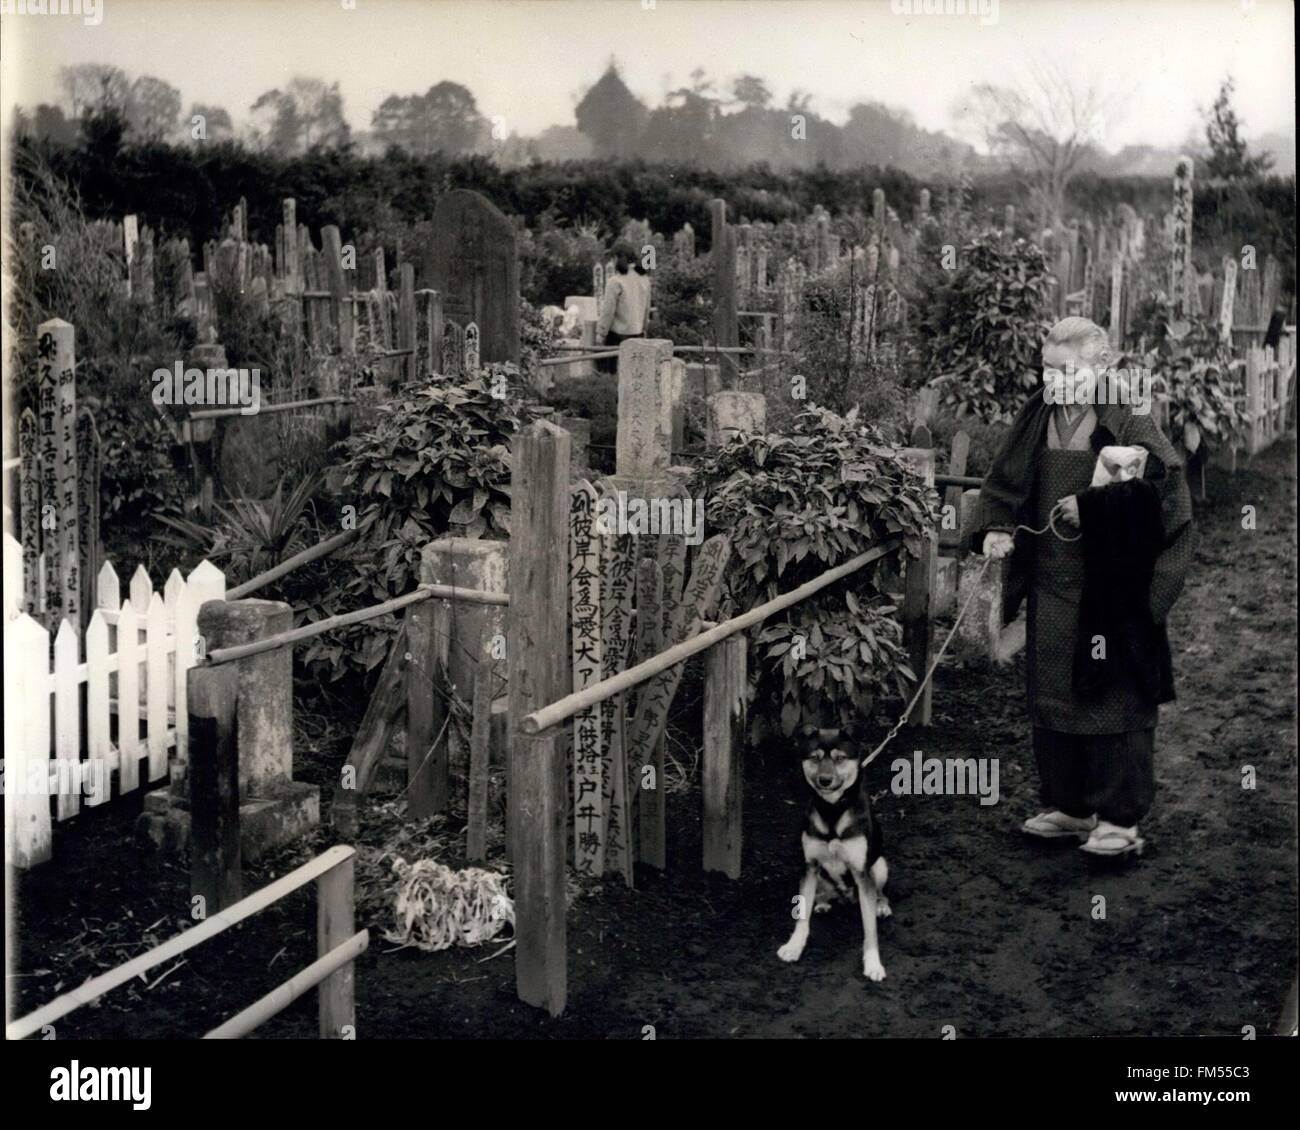 1968 - A Japanese Animal Cemetery: An old lady brings along her new pet dog to visit the grave of her late canine companion. © Keystone Pictures USA/ZUMAPRESS.com/Alamy Live News Stock Photo